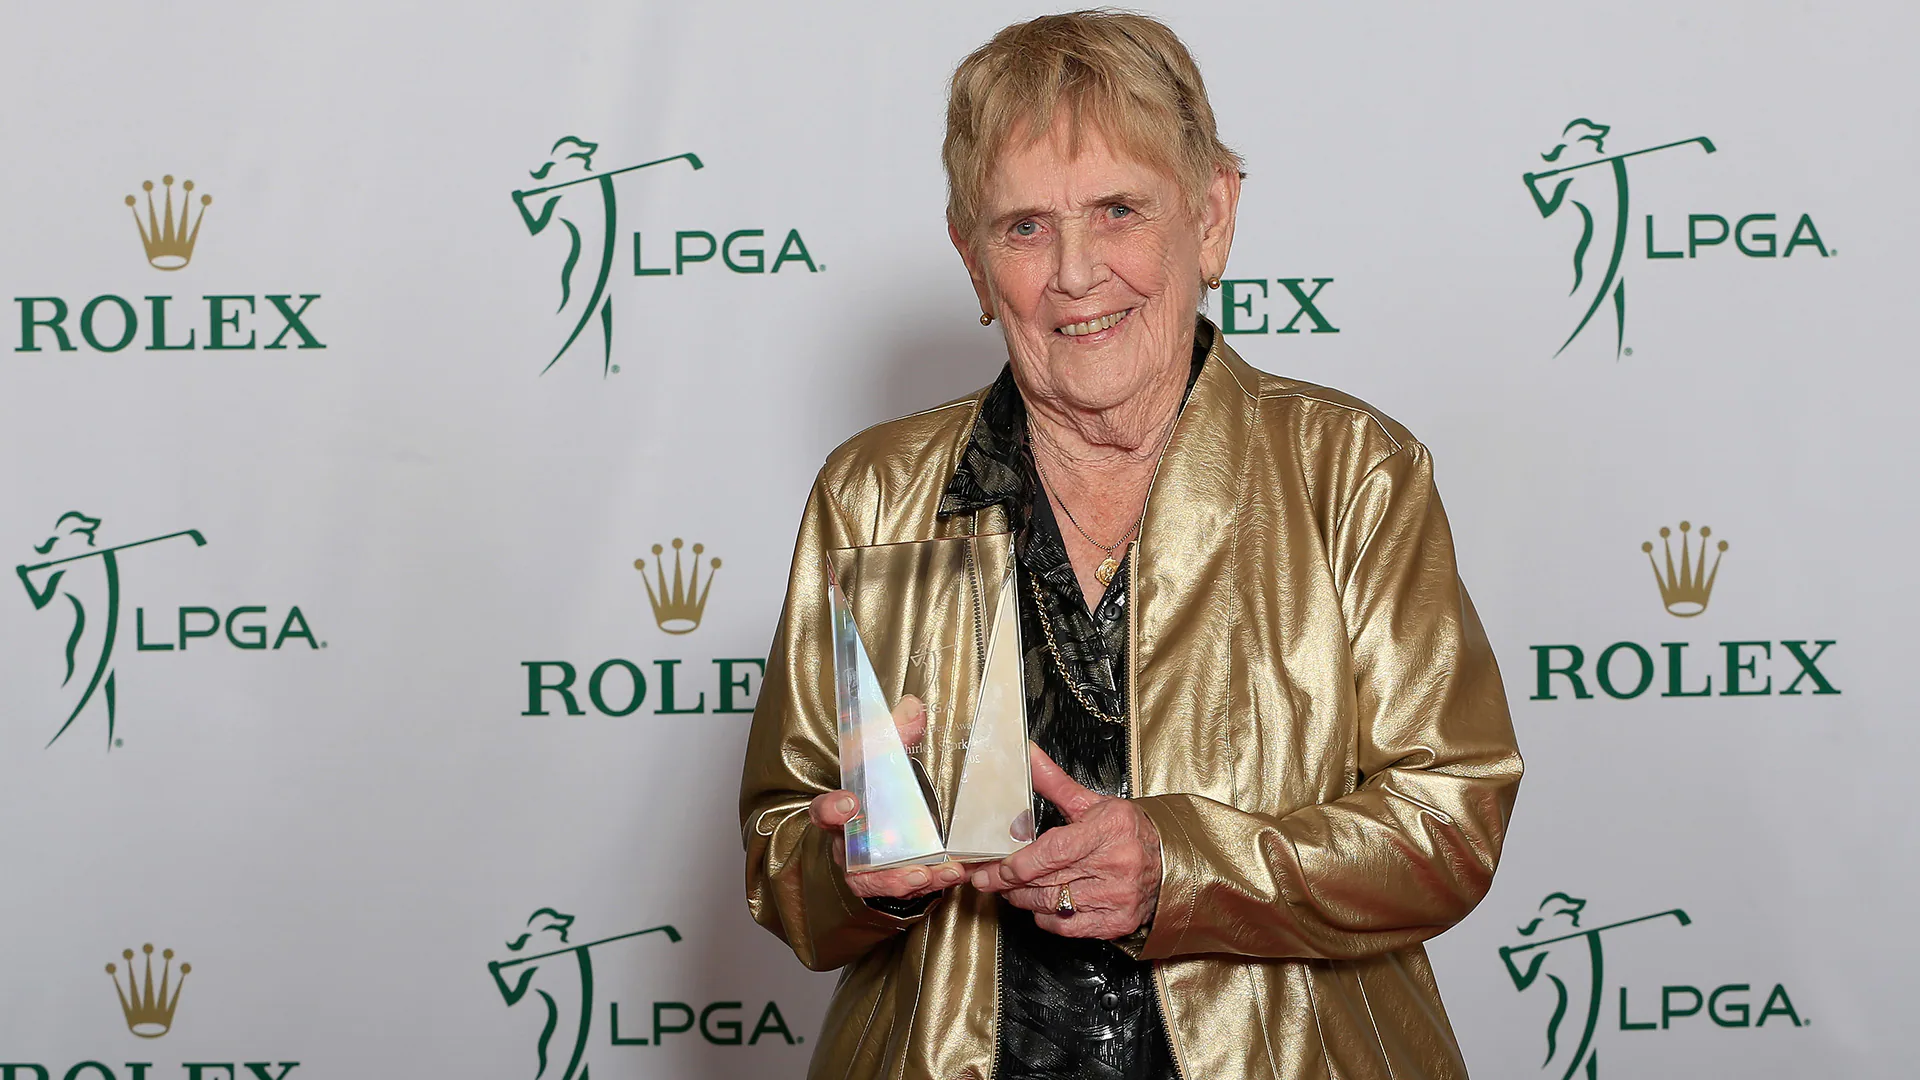 LPGA founder, recent Hall of Fame selection Shirley Spork dies at 94